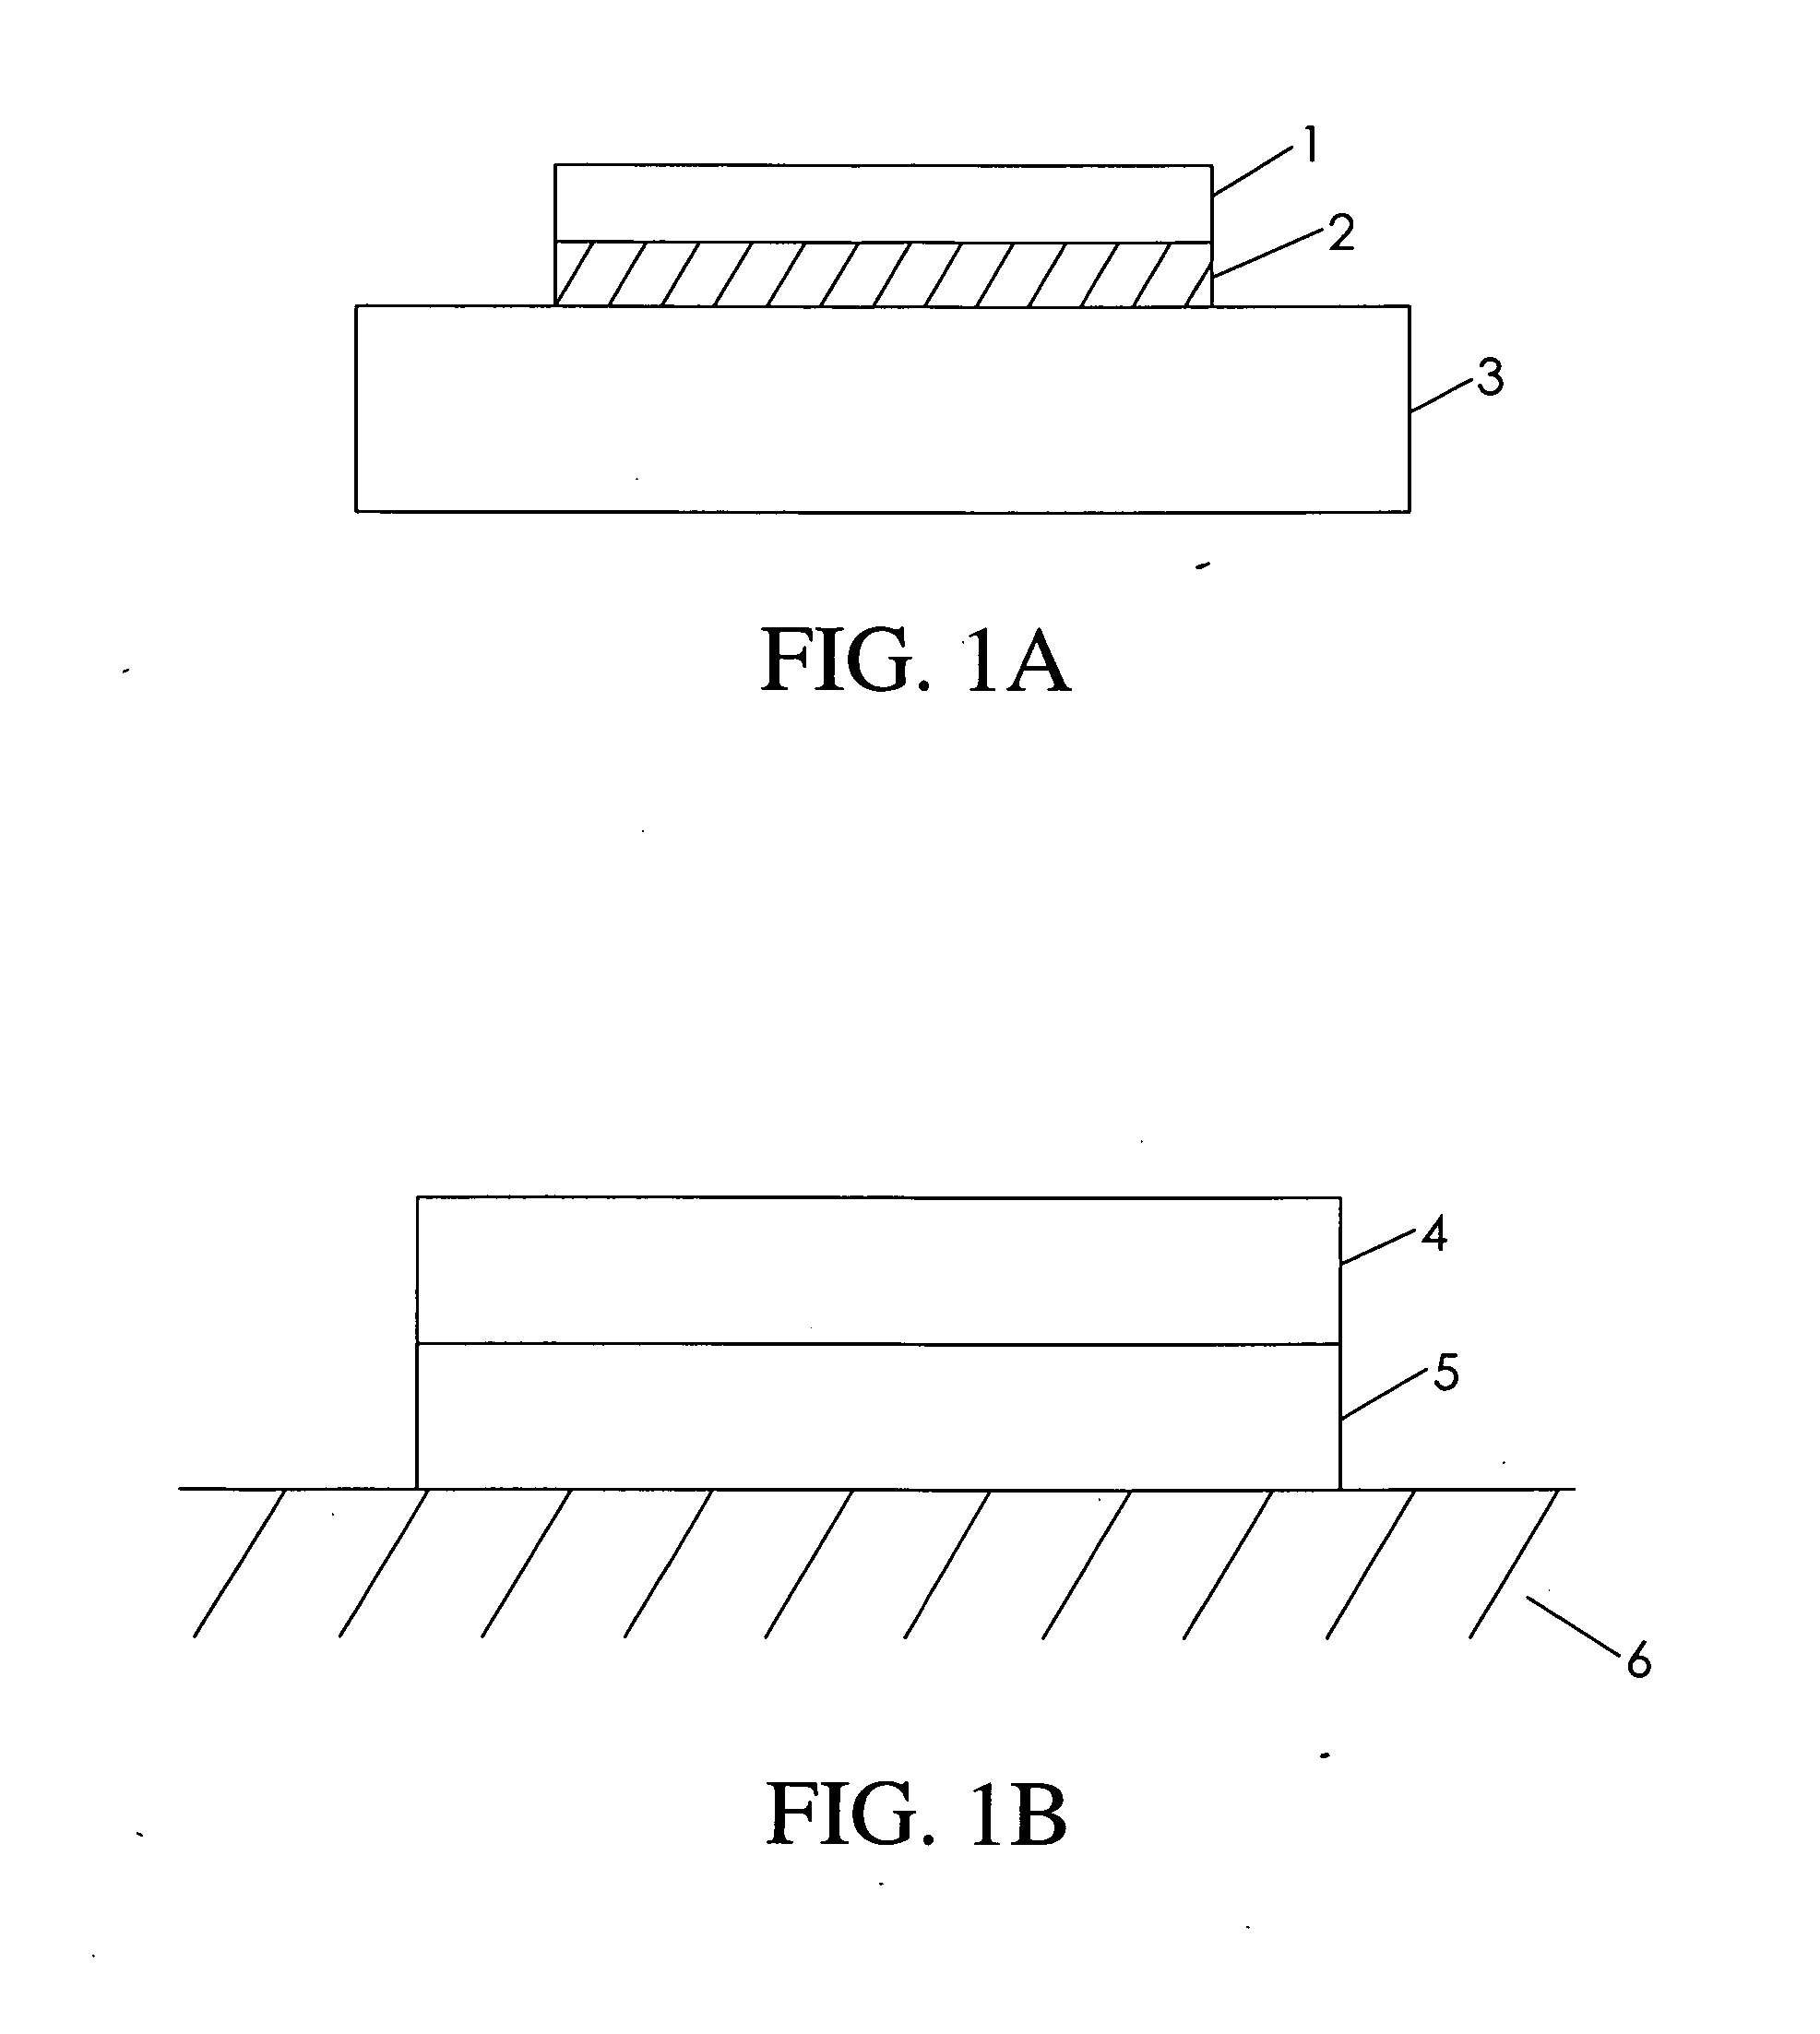 Flexible semiconductor devices based on flexible freestanding epitaxial elements